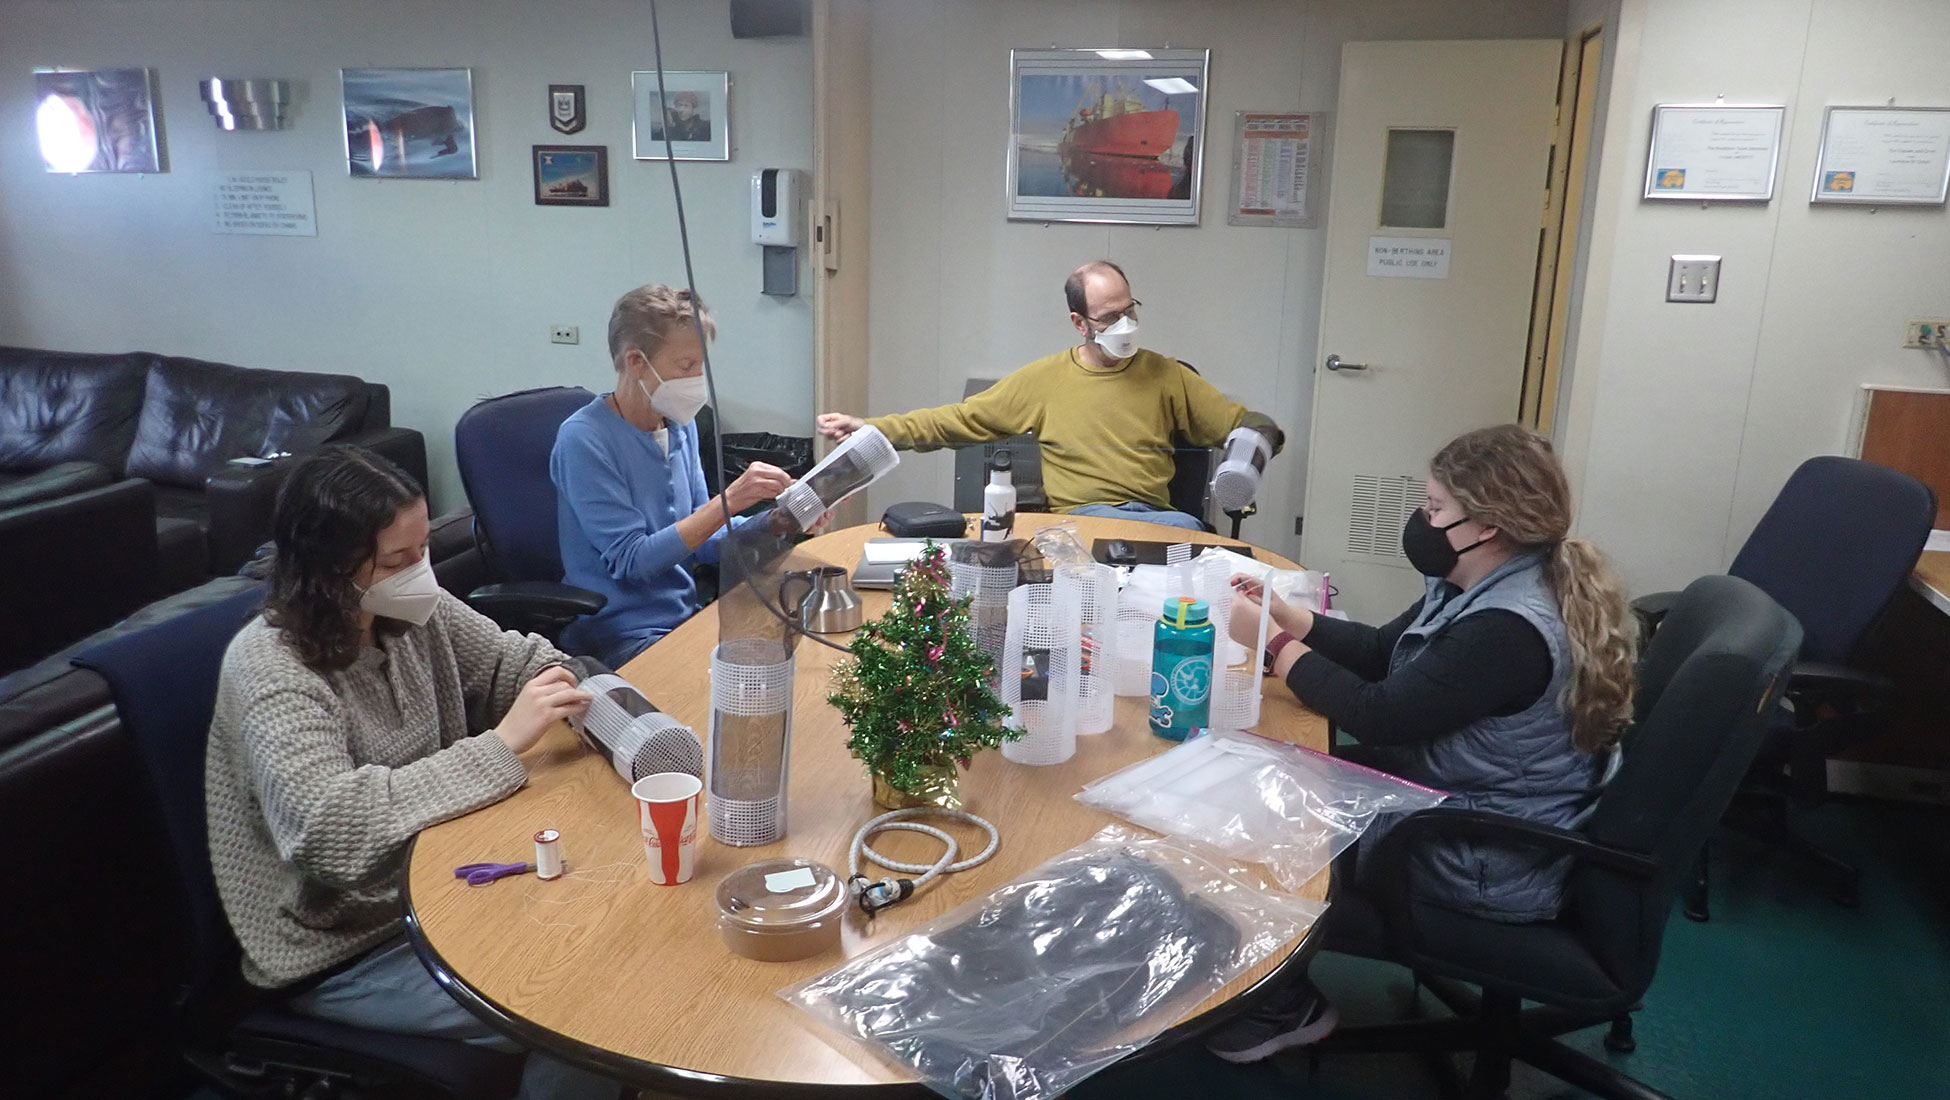 Wearing facemasks, everyone sits around a table making enclosures. A small artificial Christmas tree sits in the center of the table. 